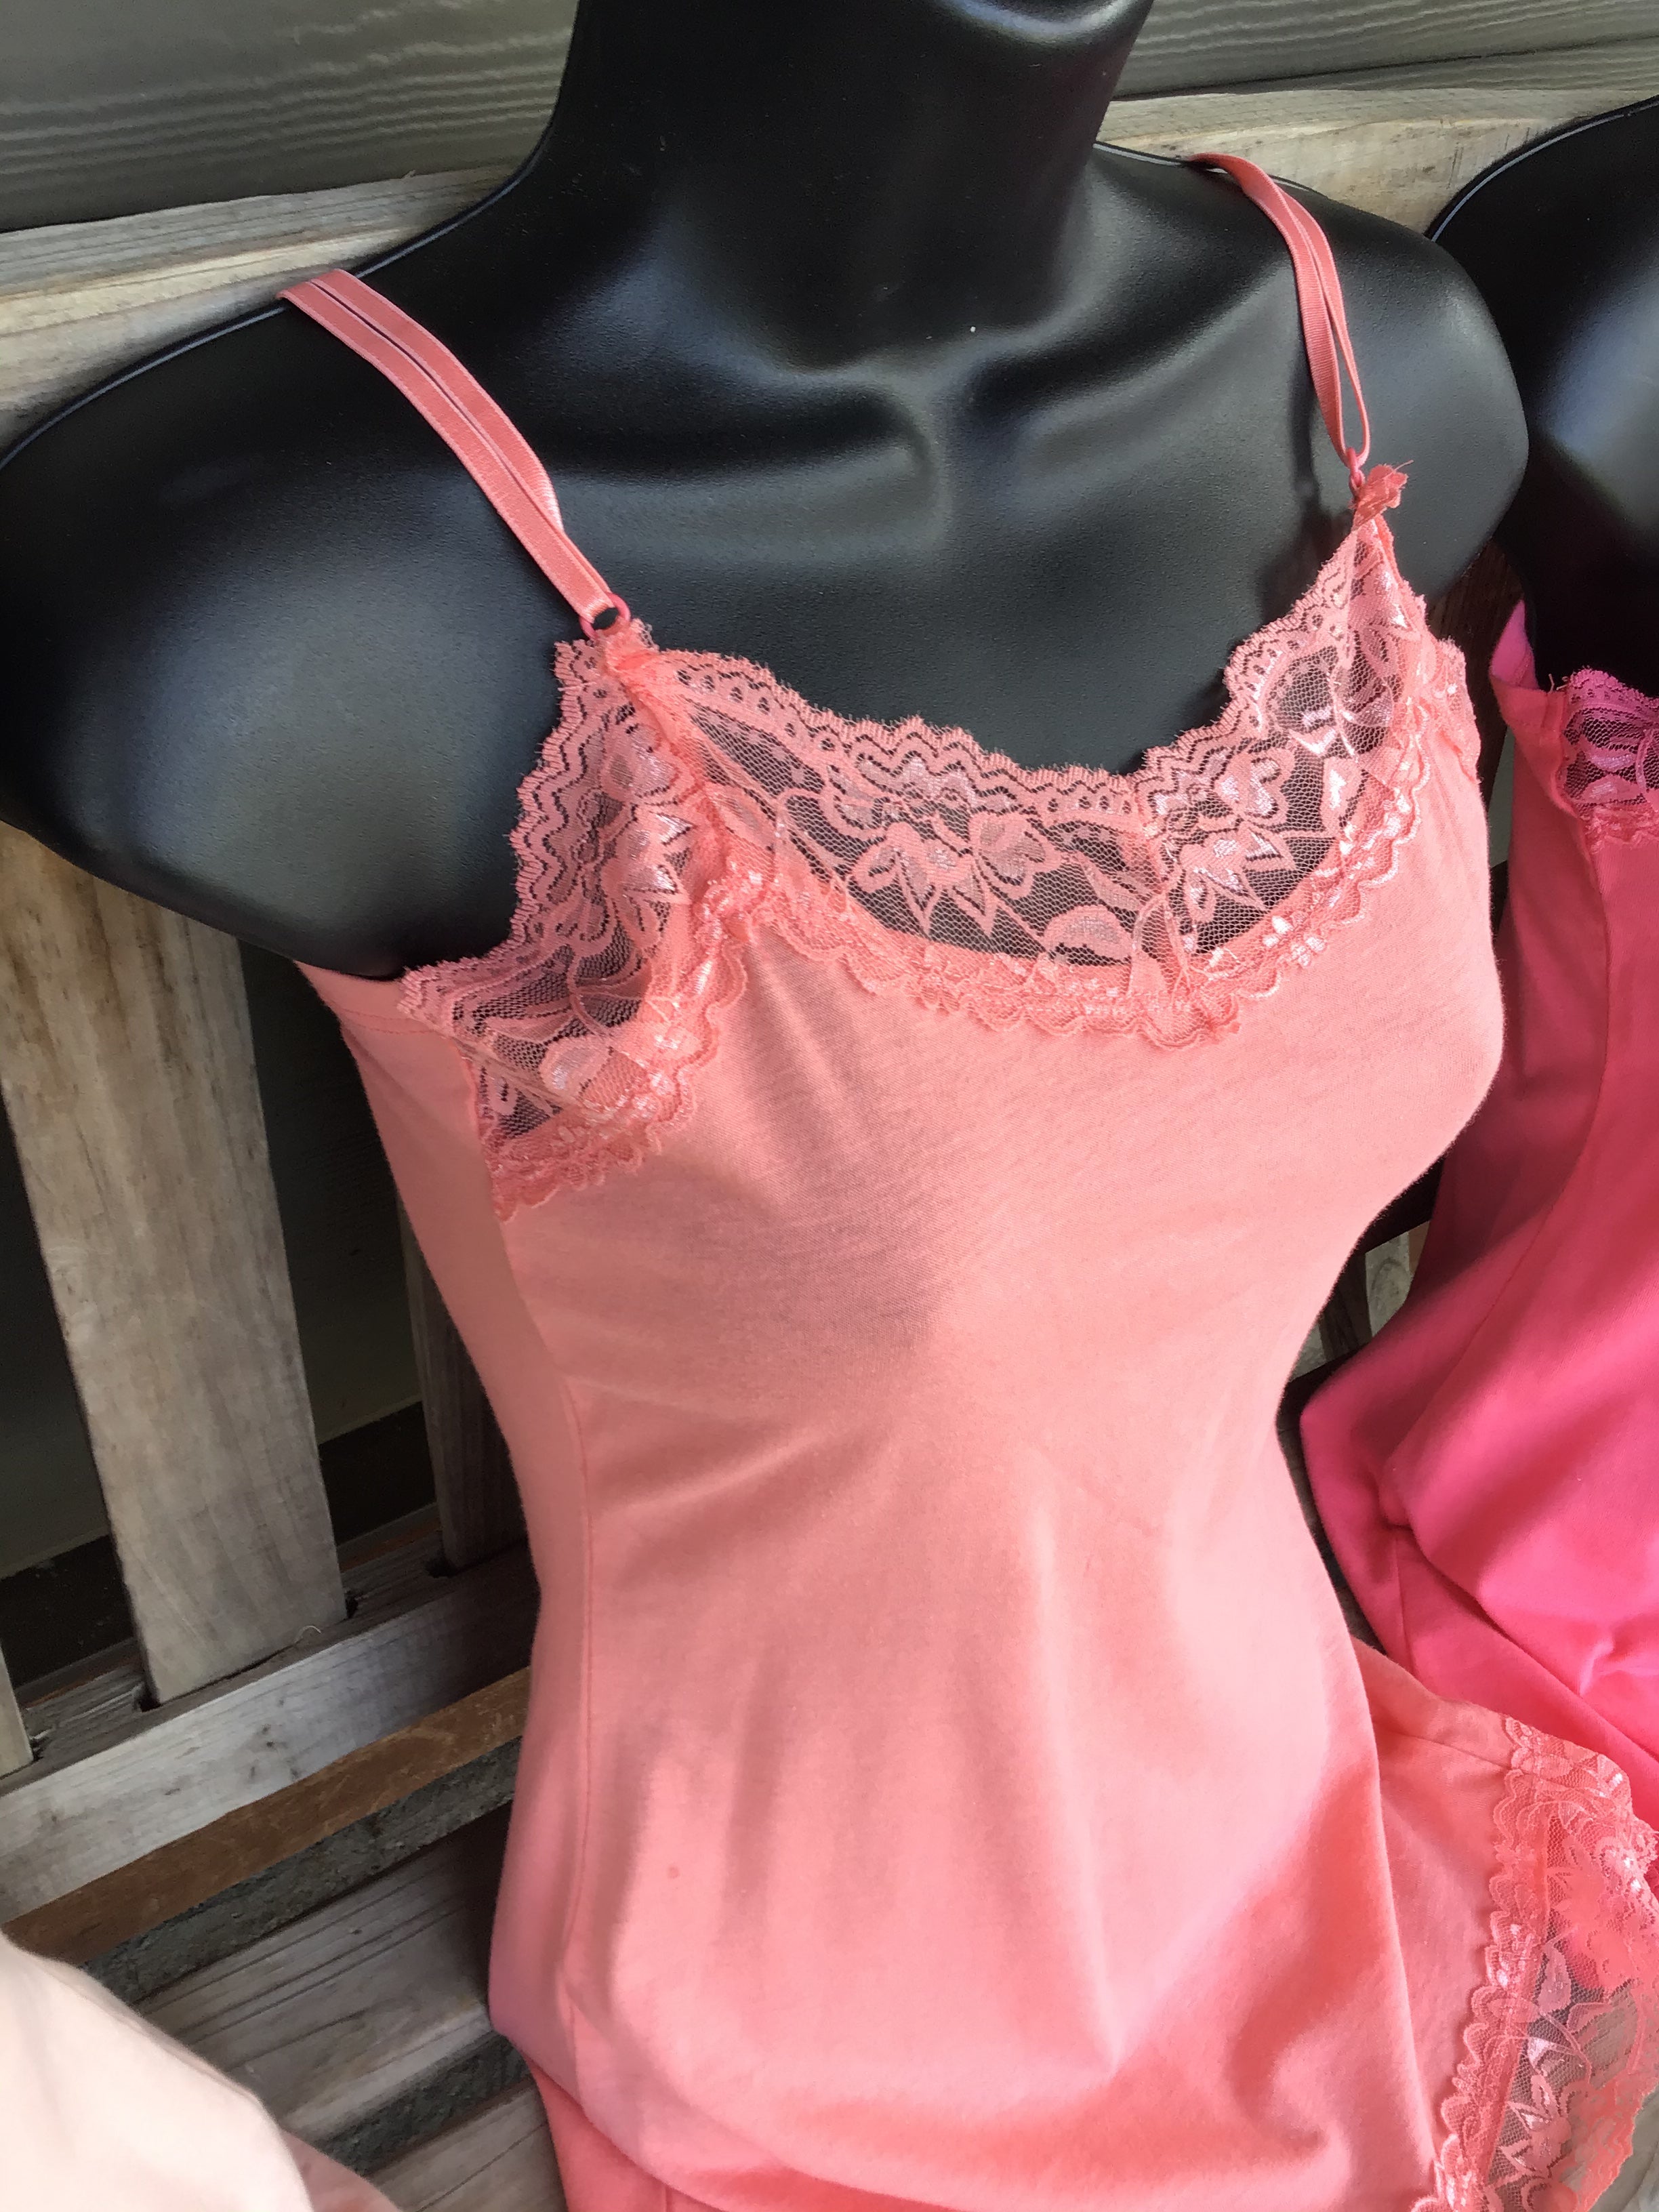 Fitted spaghetti strap top with lace detail. Junior Size. Colours soft peach coral and vibrant